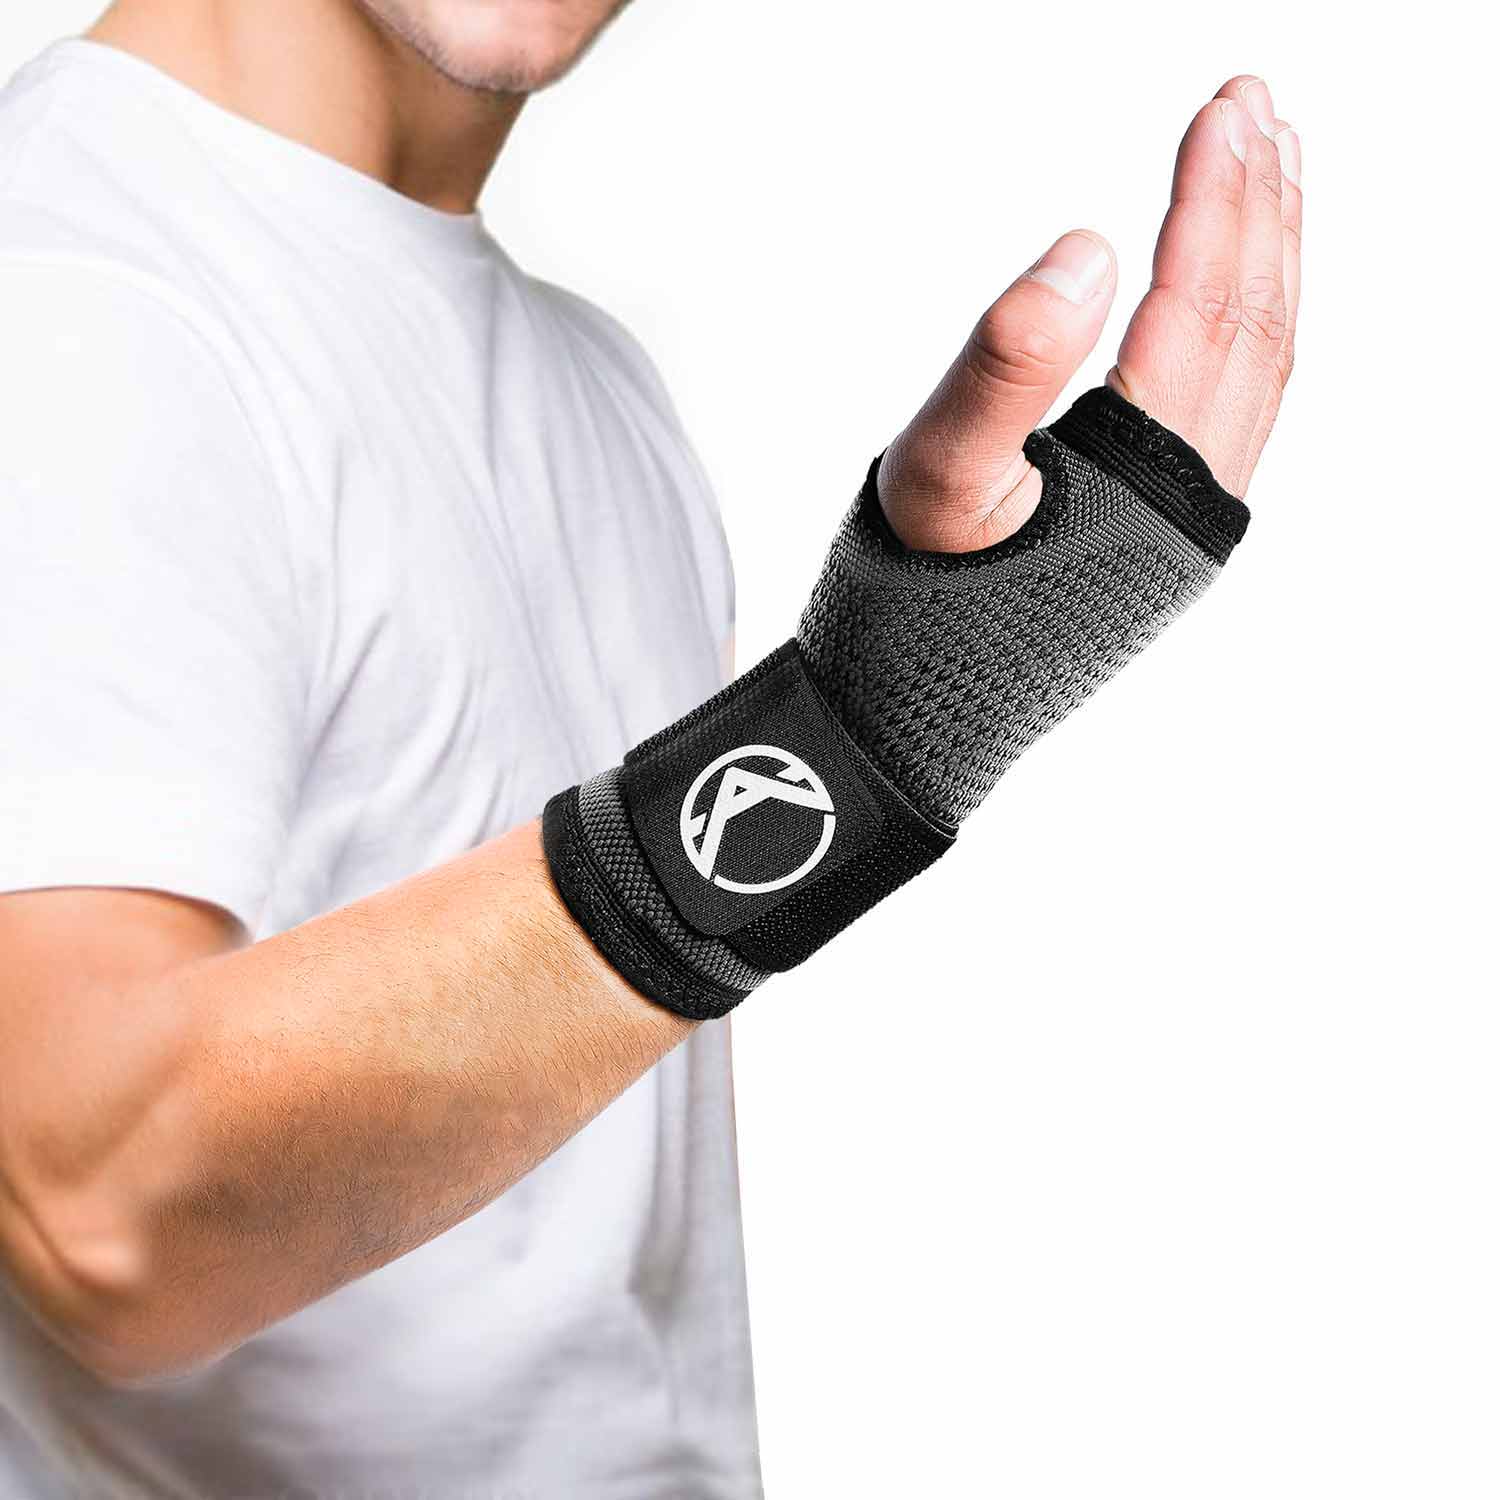 Koprez compression wrist brace comes with wrist support straps for extra stabilization and relief from carpal tunnel pain